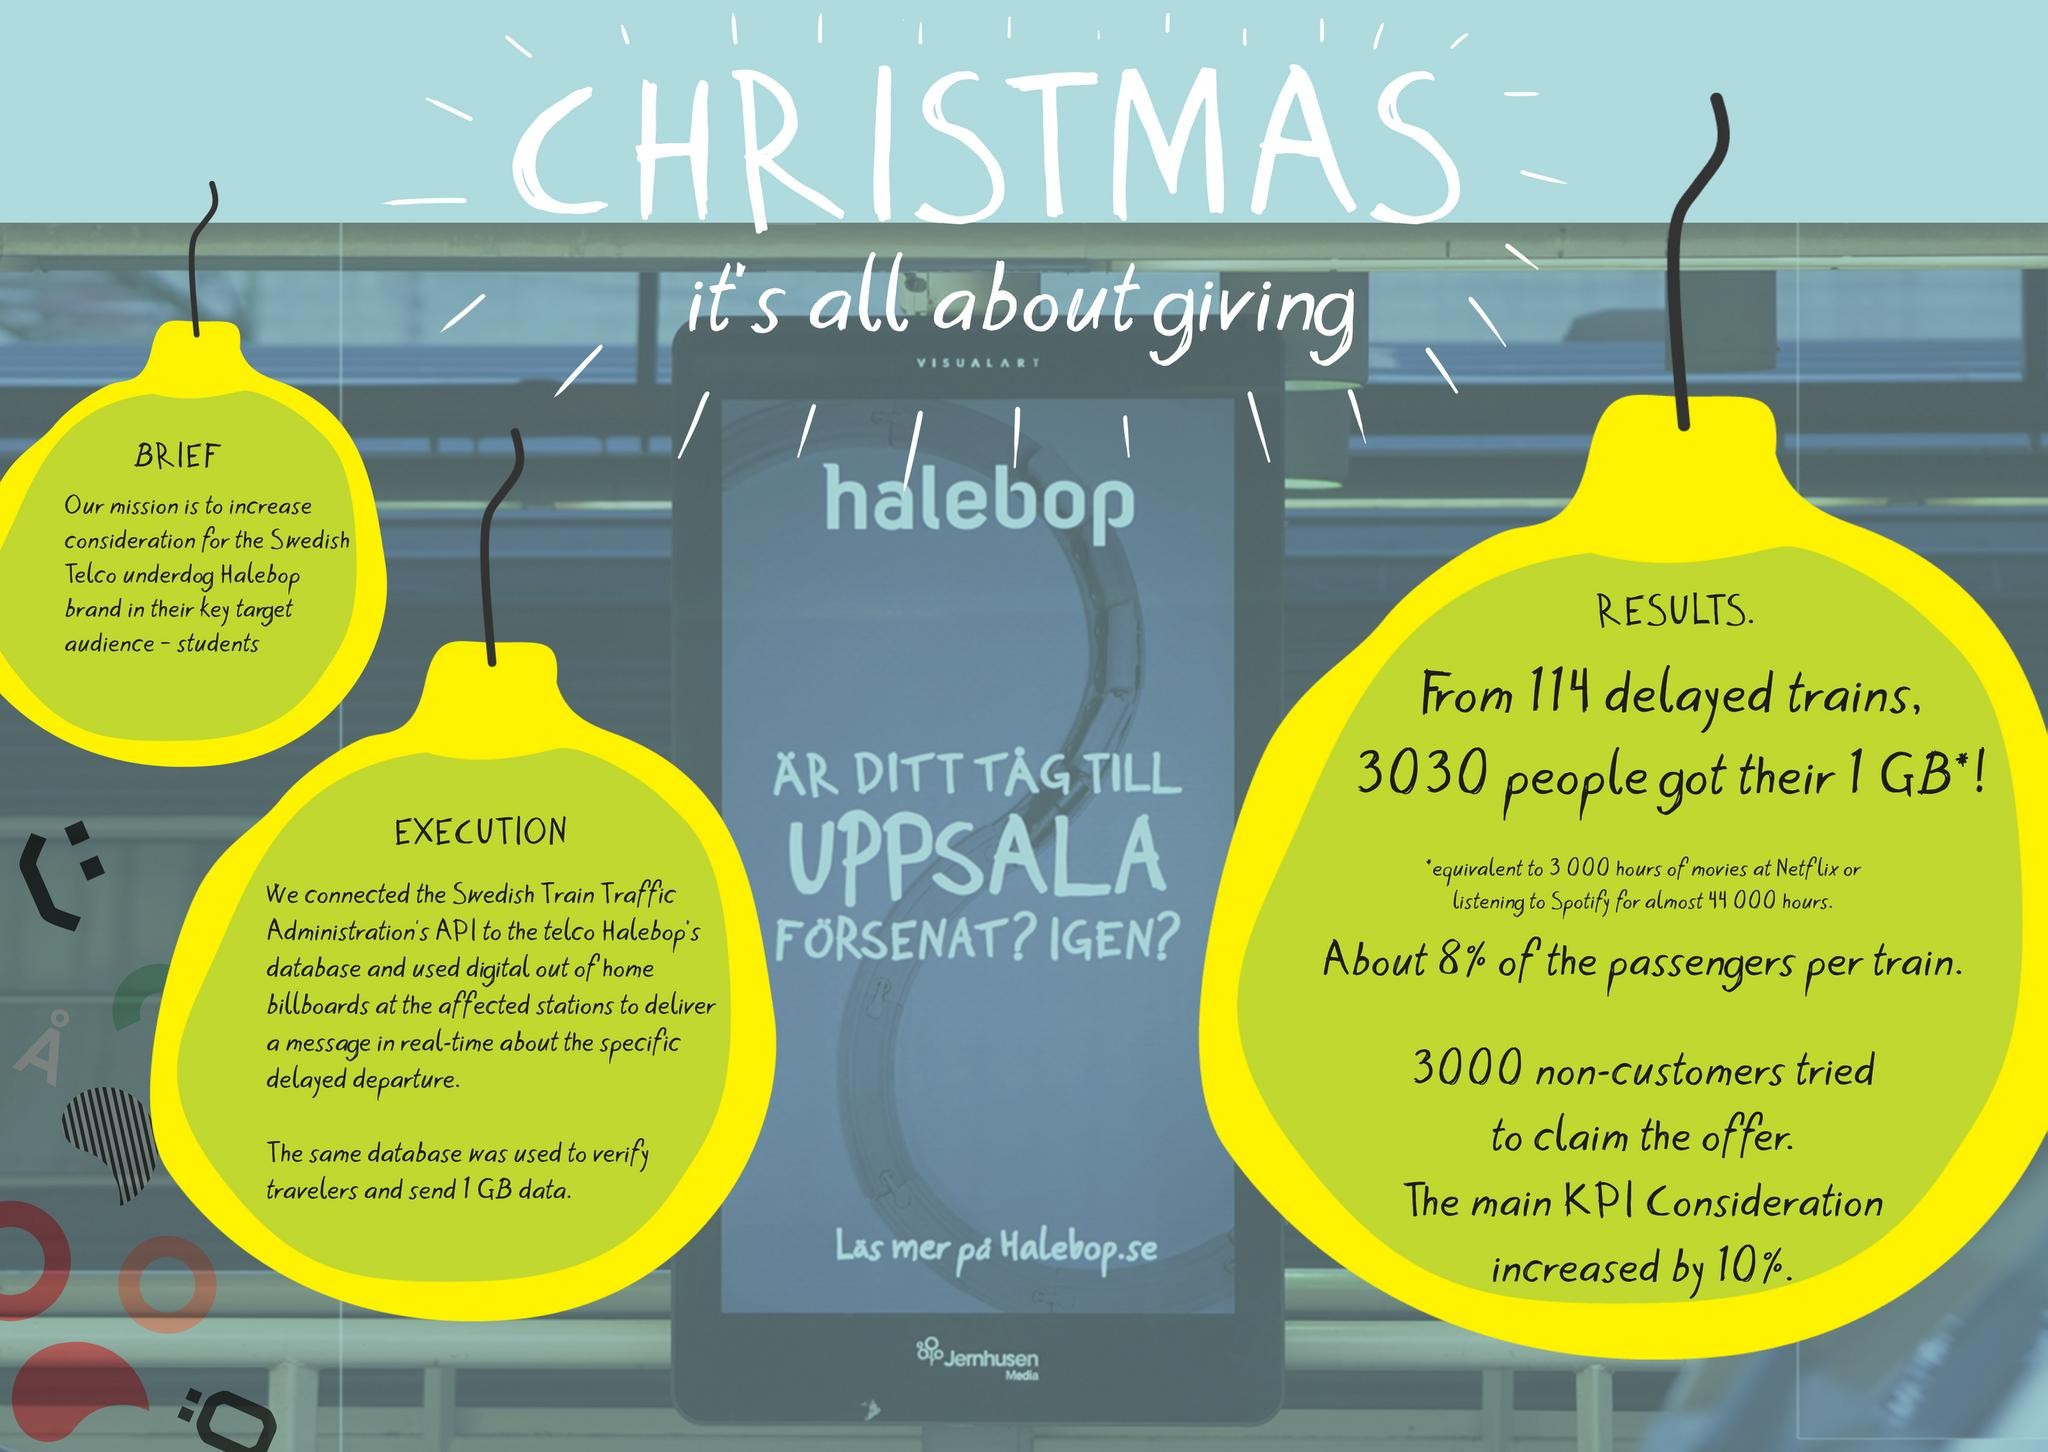 Halebop - Christmas is all about giving